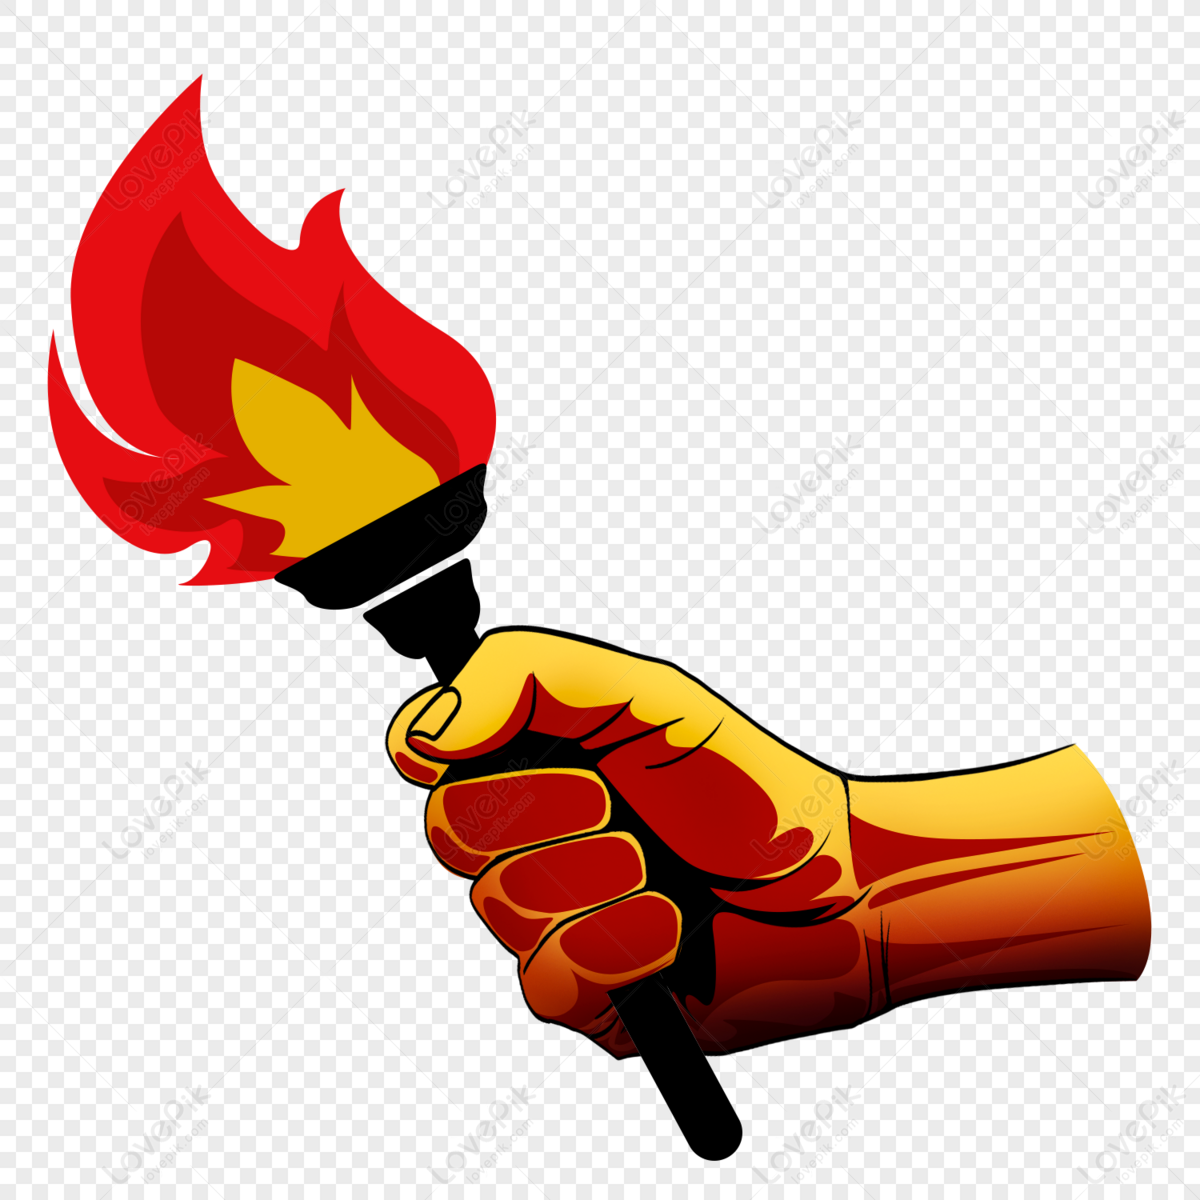 Hand Holding Flaming Torch: Over 840 Royalty-Free Licensable Stock Vectors  & Vector Art | Shutterstock